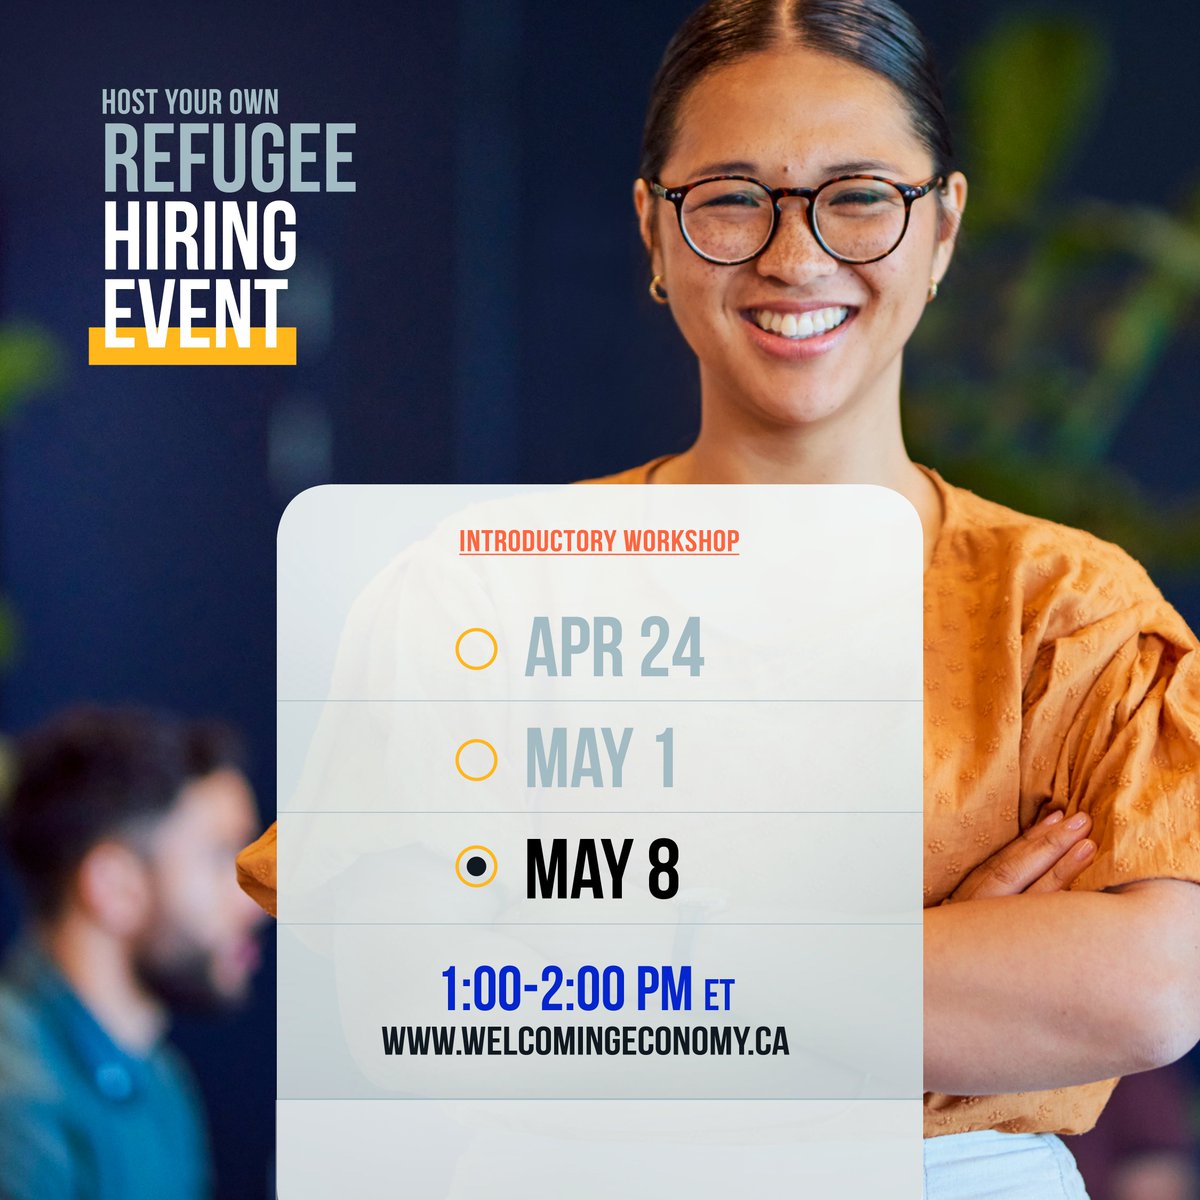 Municipalities, settlement agencies, and employers in Canada can run hiring events for #refugees in their own communities. Learn how in this Introductory Workshop from #WelcomingEconomy! Register: bit.ly/we-training-20…